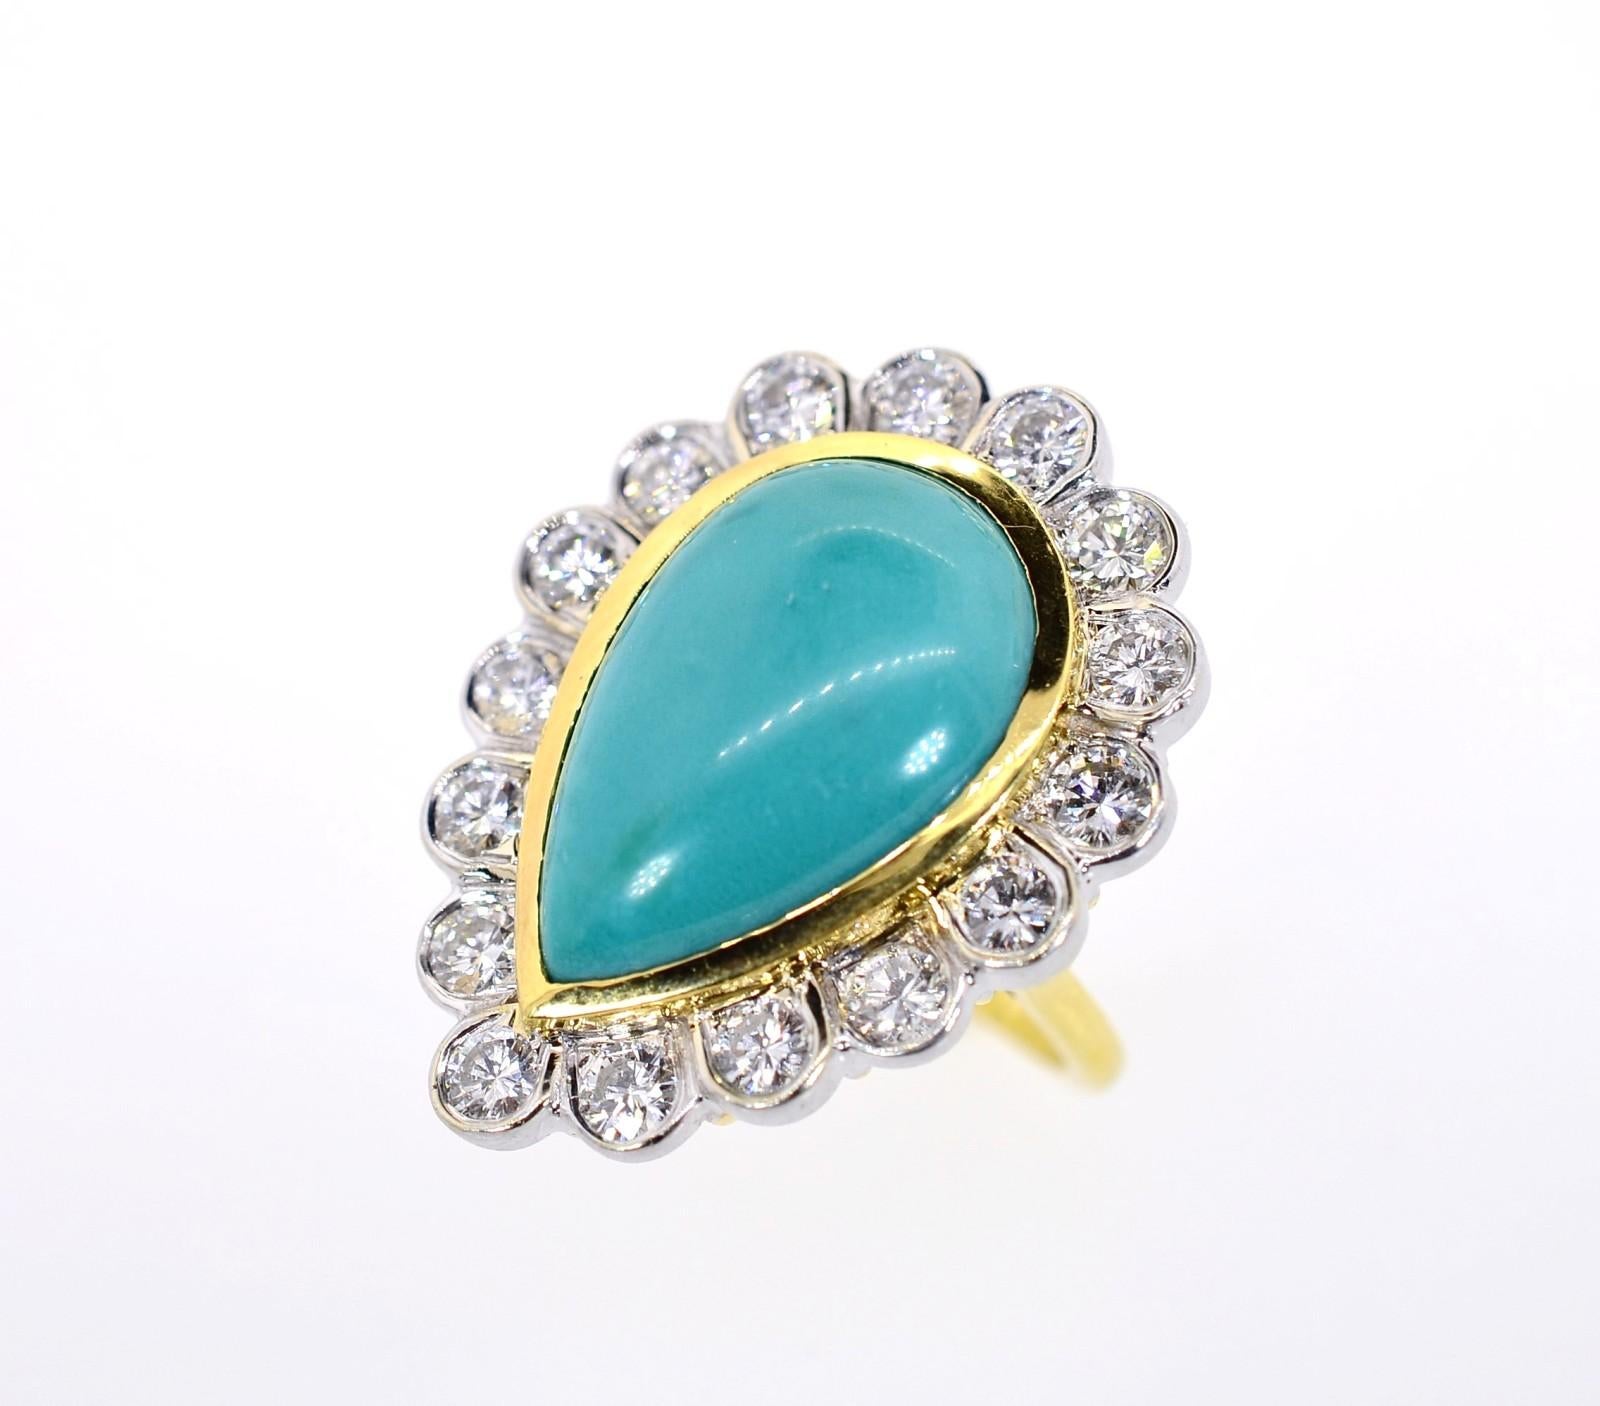 A brilliant 18KT yellow gold ring flaunting a cabochon pear shape Turquoise stone, surrounded by 2.10 carats of Round Brilliant cut Diamonds. The diamonds of H/I color - VS clarity are set in white gold bezels, giving a gorgeous contrast to this